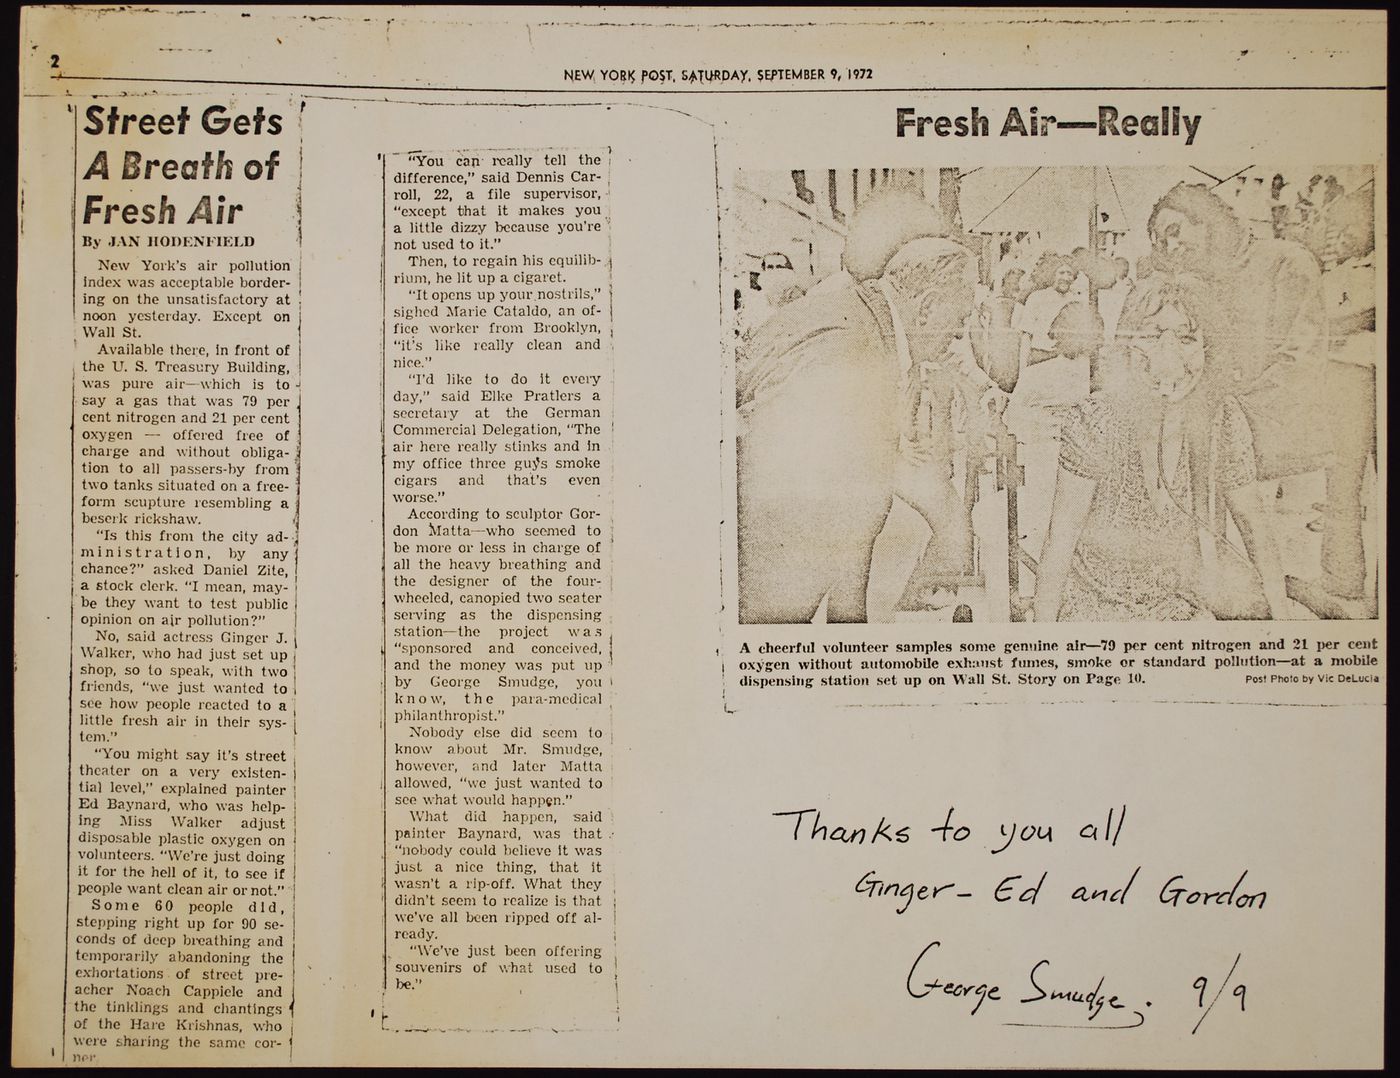 Annotated photocopy of a newspaper article by Jan Hodenfield, "Street Gets a Breath of Fresh Air, "New York Post", p. 2